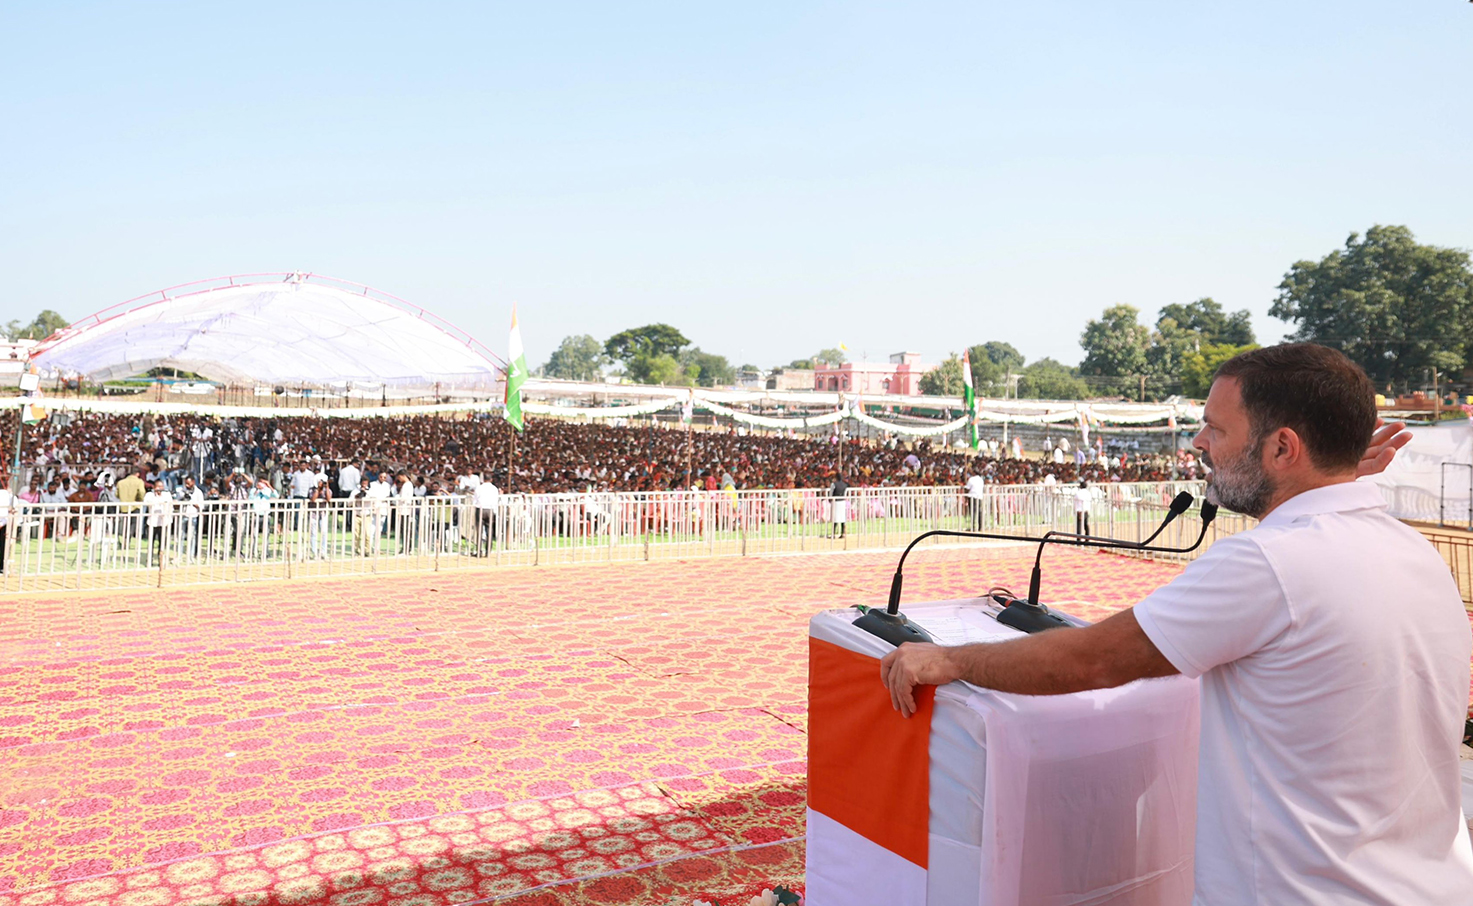 Rahul Gandhi Pledges Free Education in Chhattisgarh Schools and Colleges if Congress Remains in Power